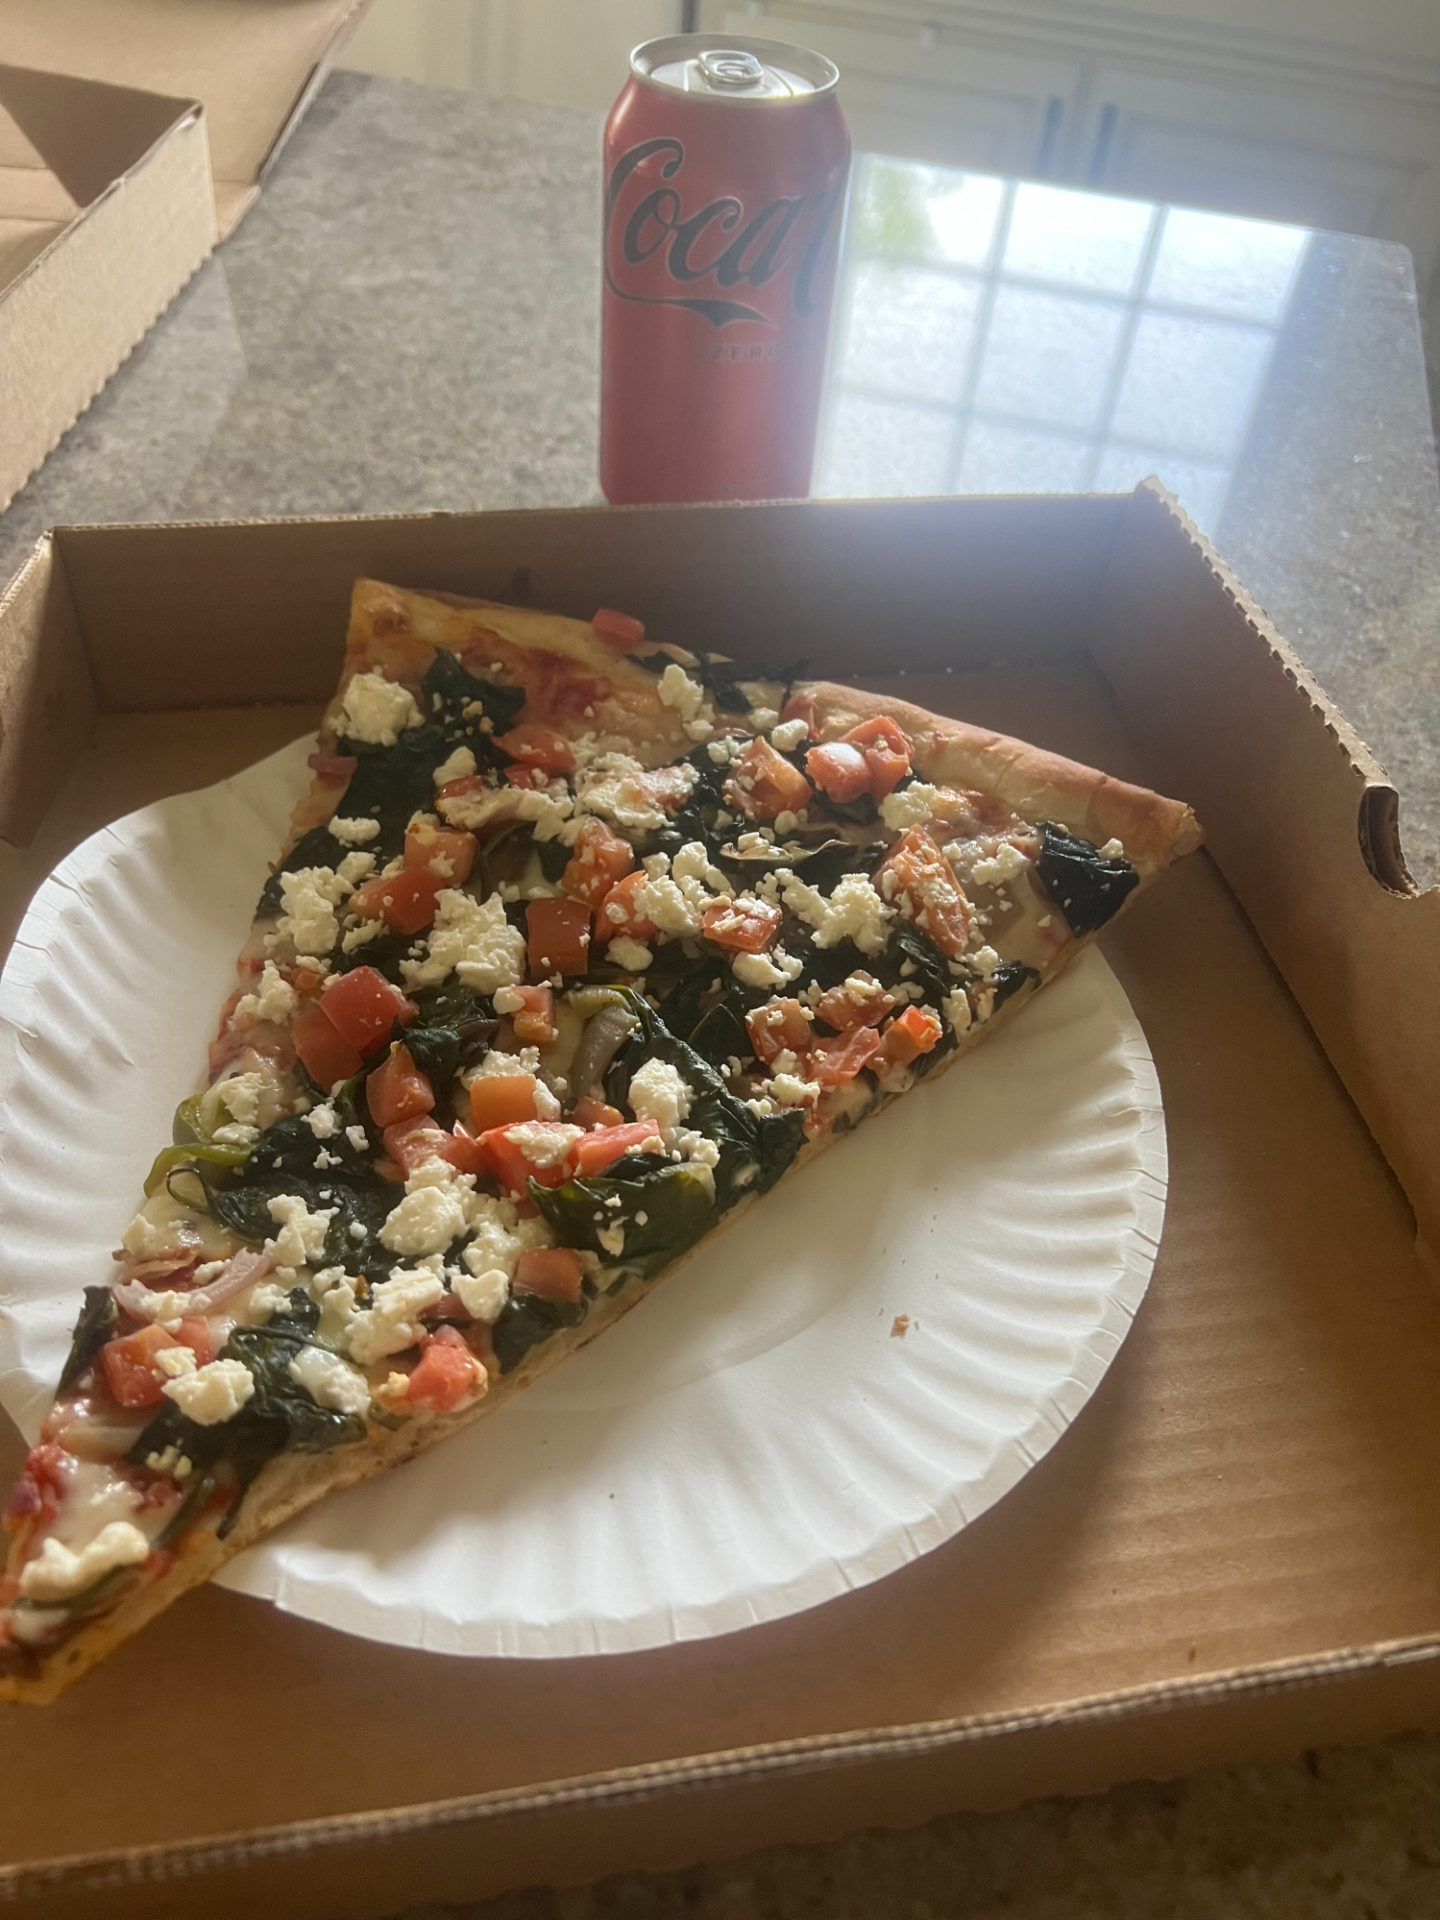 A single slice of spinach pizza on a white paper plate inside a pizza box with an unopened can of Coca Cola zero.